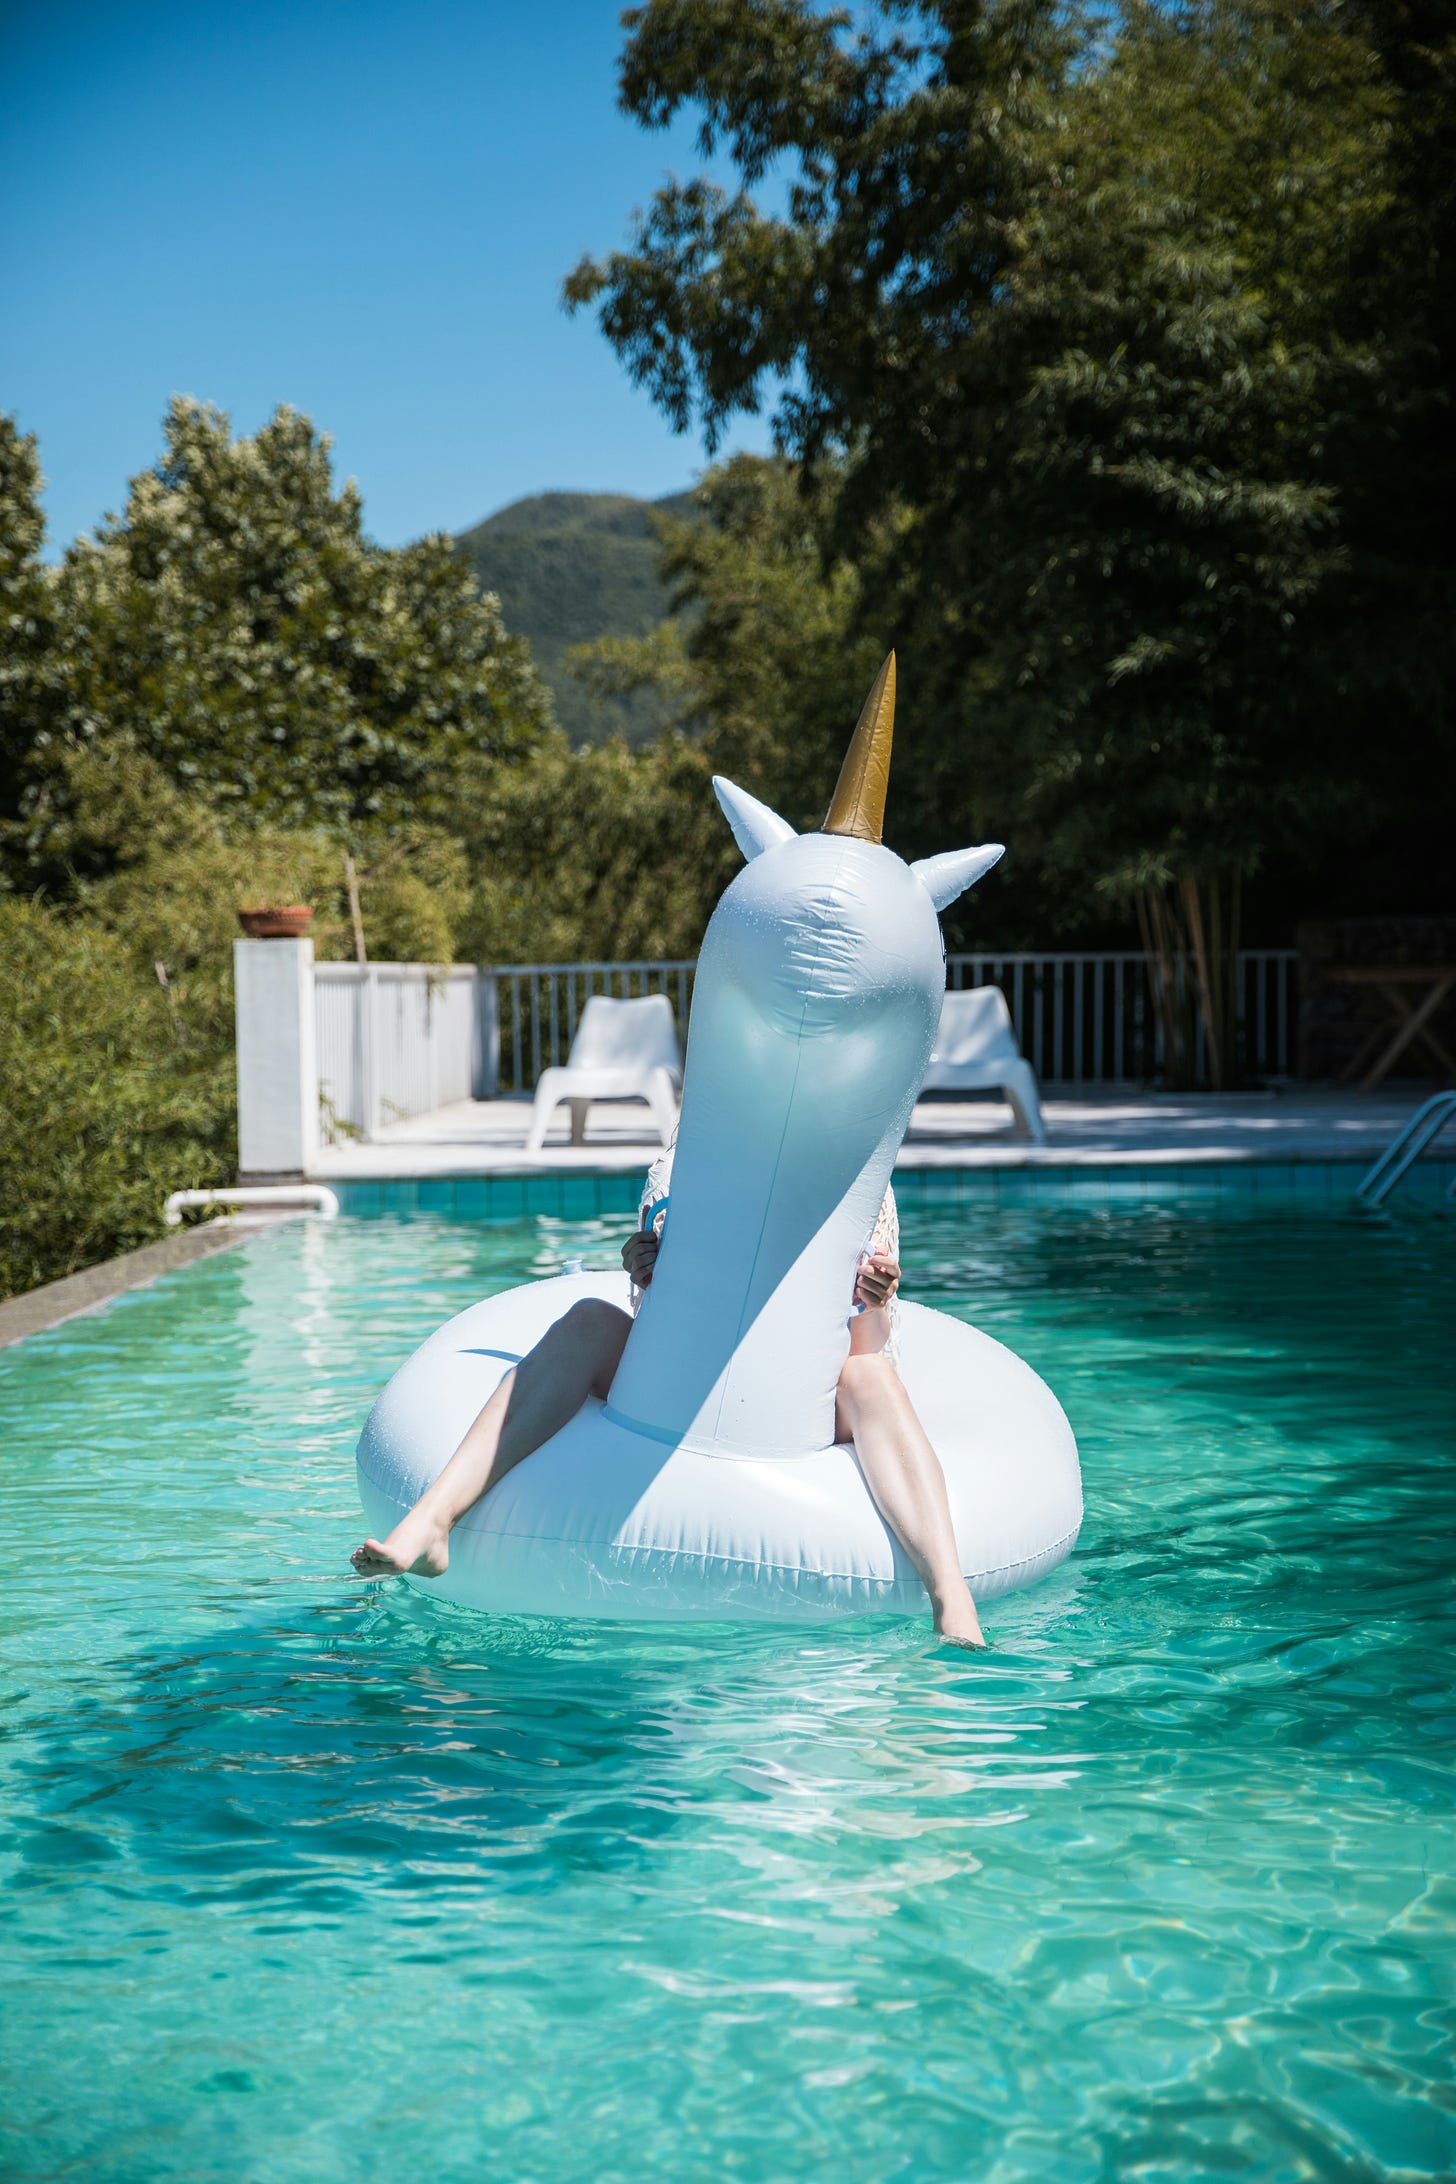 Woman on floating unicorn in a pool